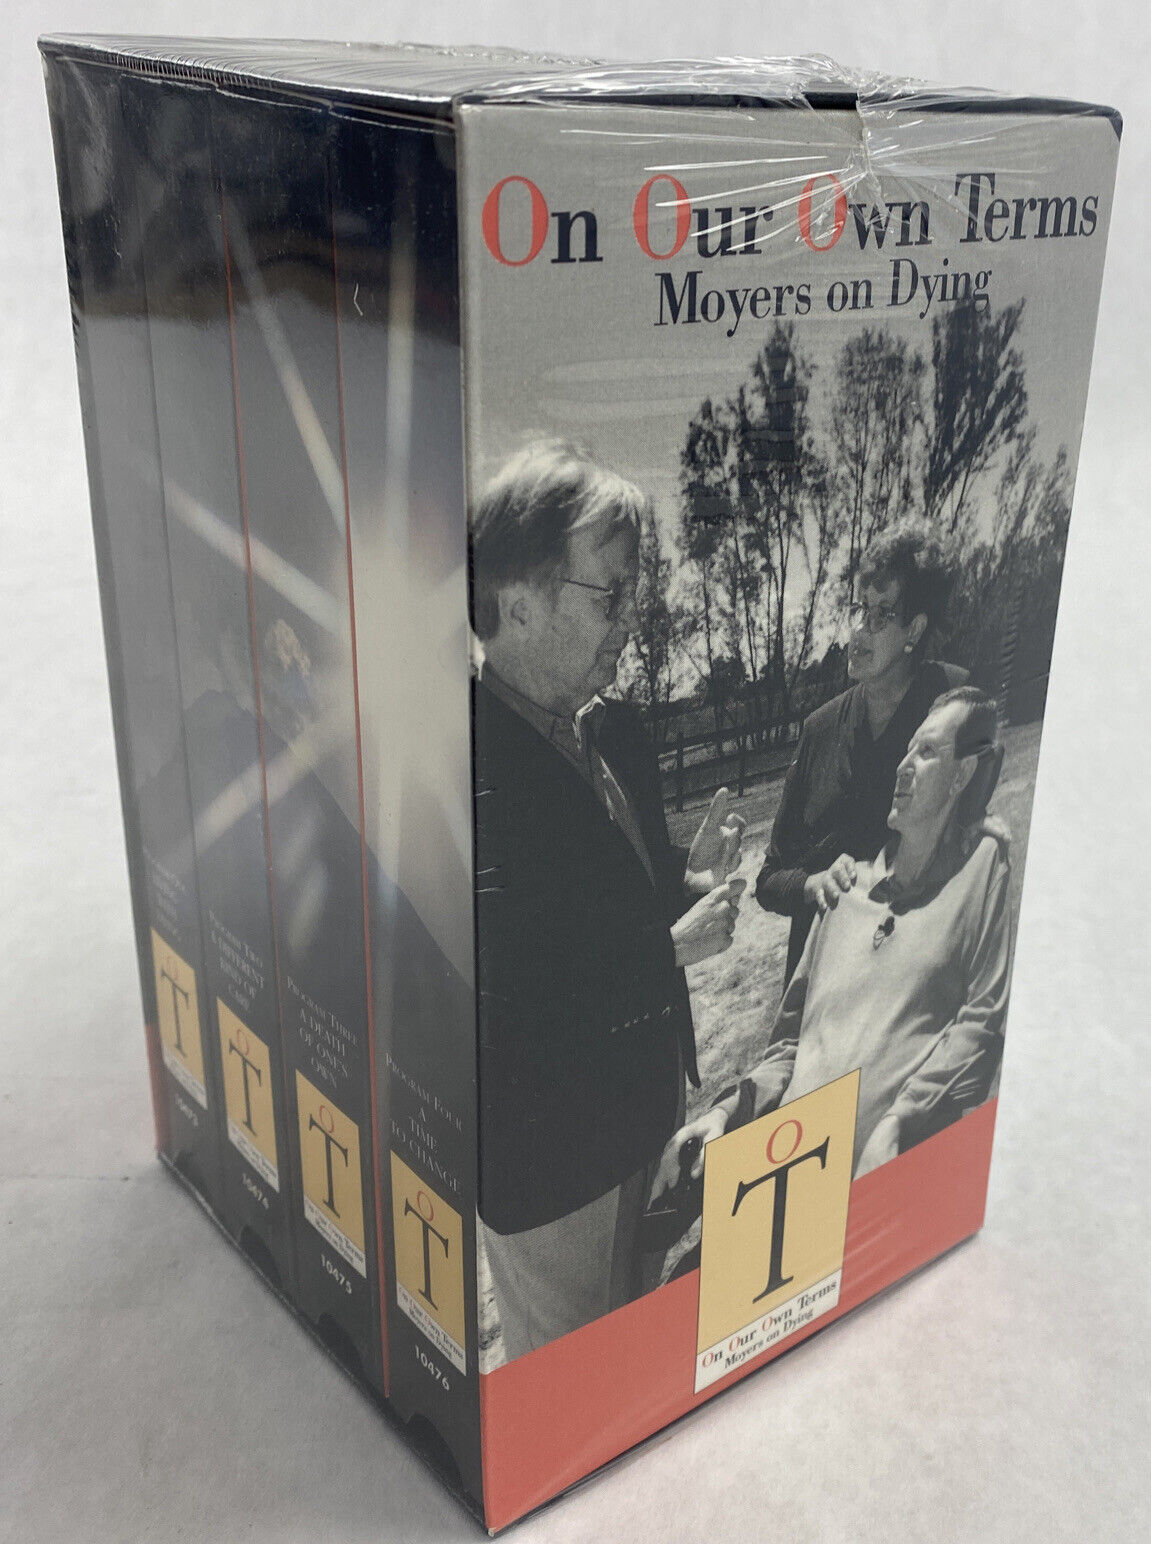 VHS On Our Own Terms Bill Moyers On Dying 2000 PBS 4 Tape 6hrs Sealed Box Set